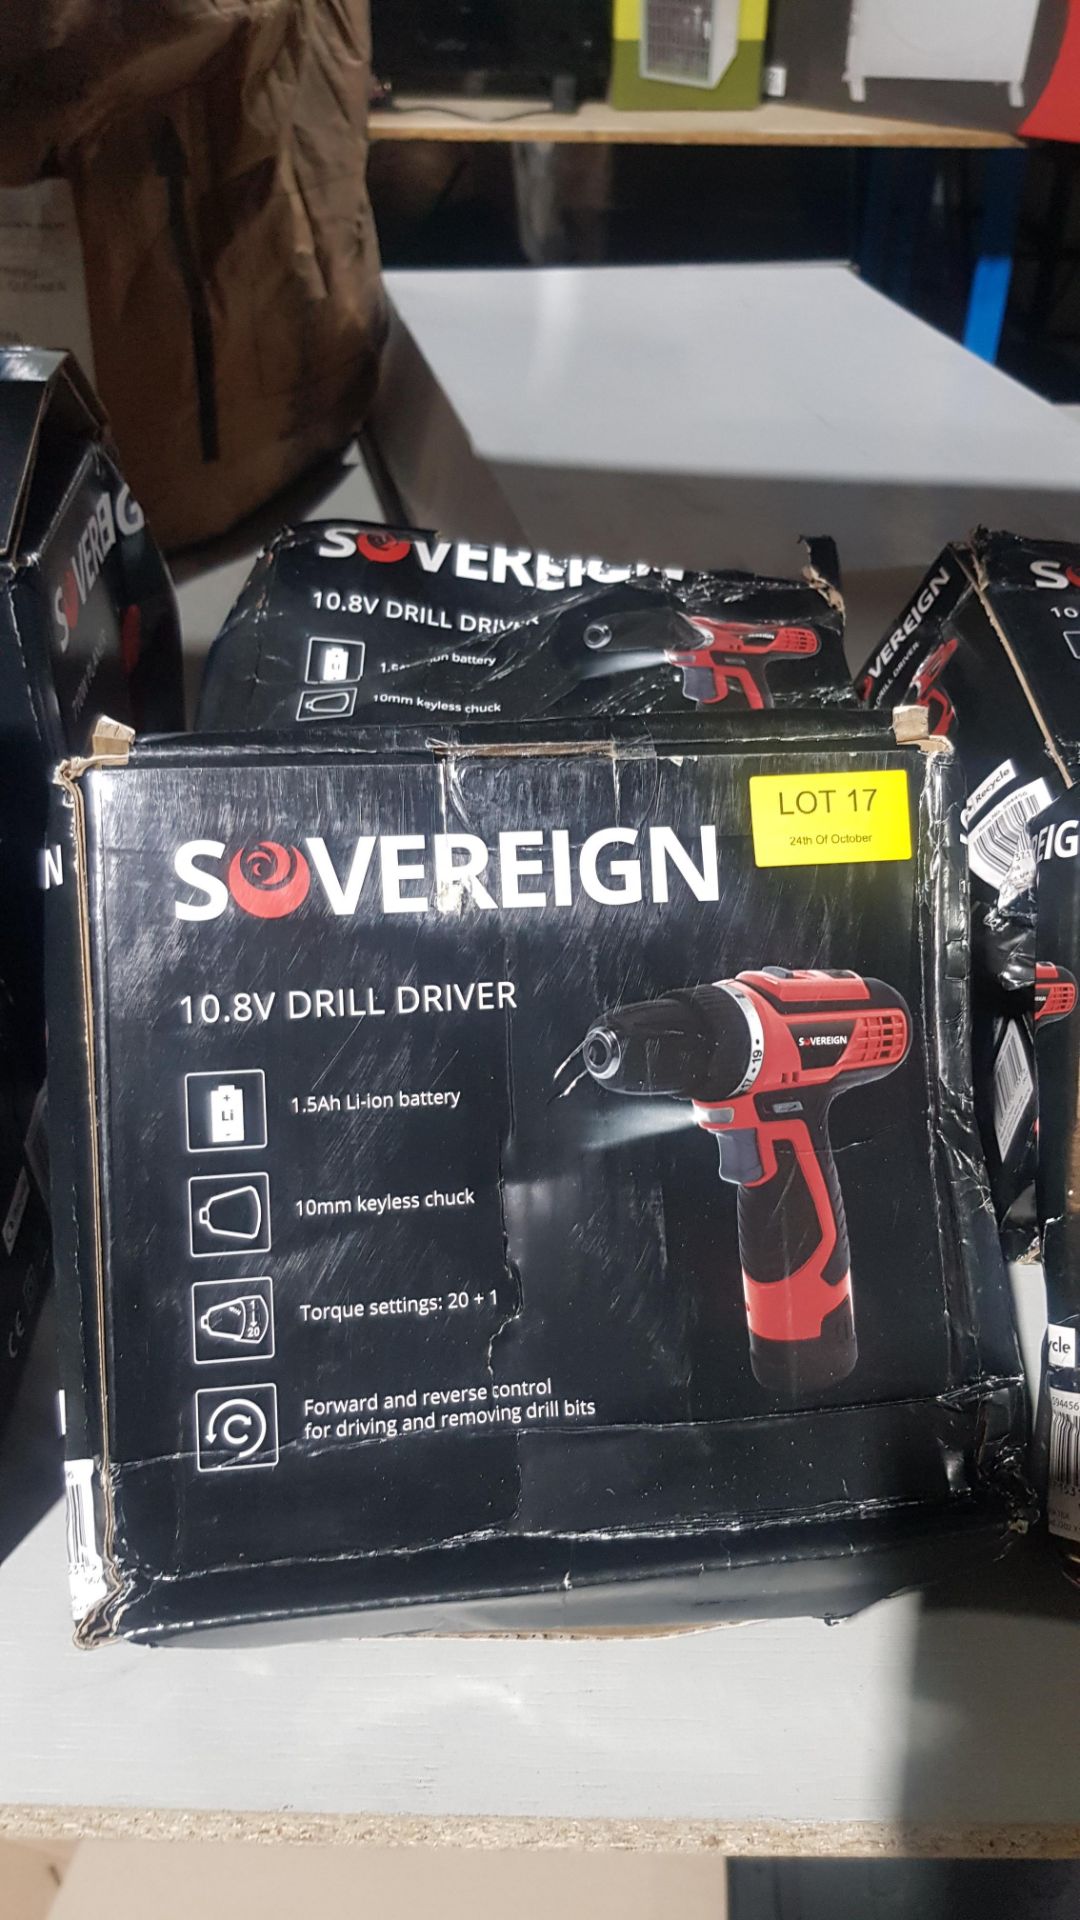 (7O) 3x Sovereign 10.8V Drill Driver RRP £30 Each. (Contents As New, Damaged Box) - Image 2 of 2